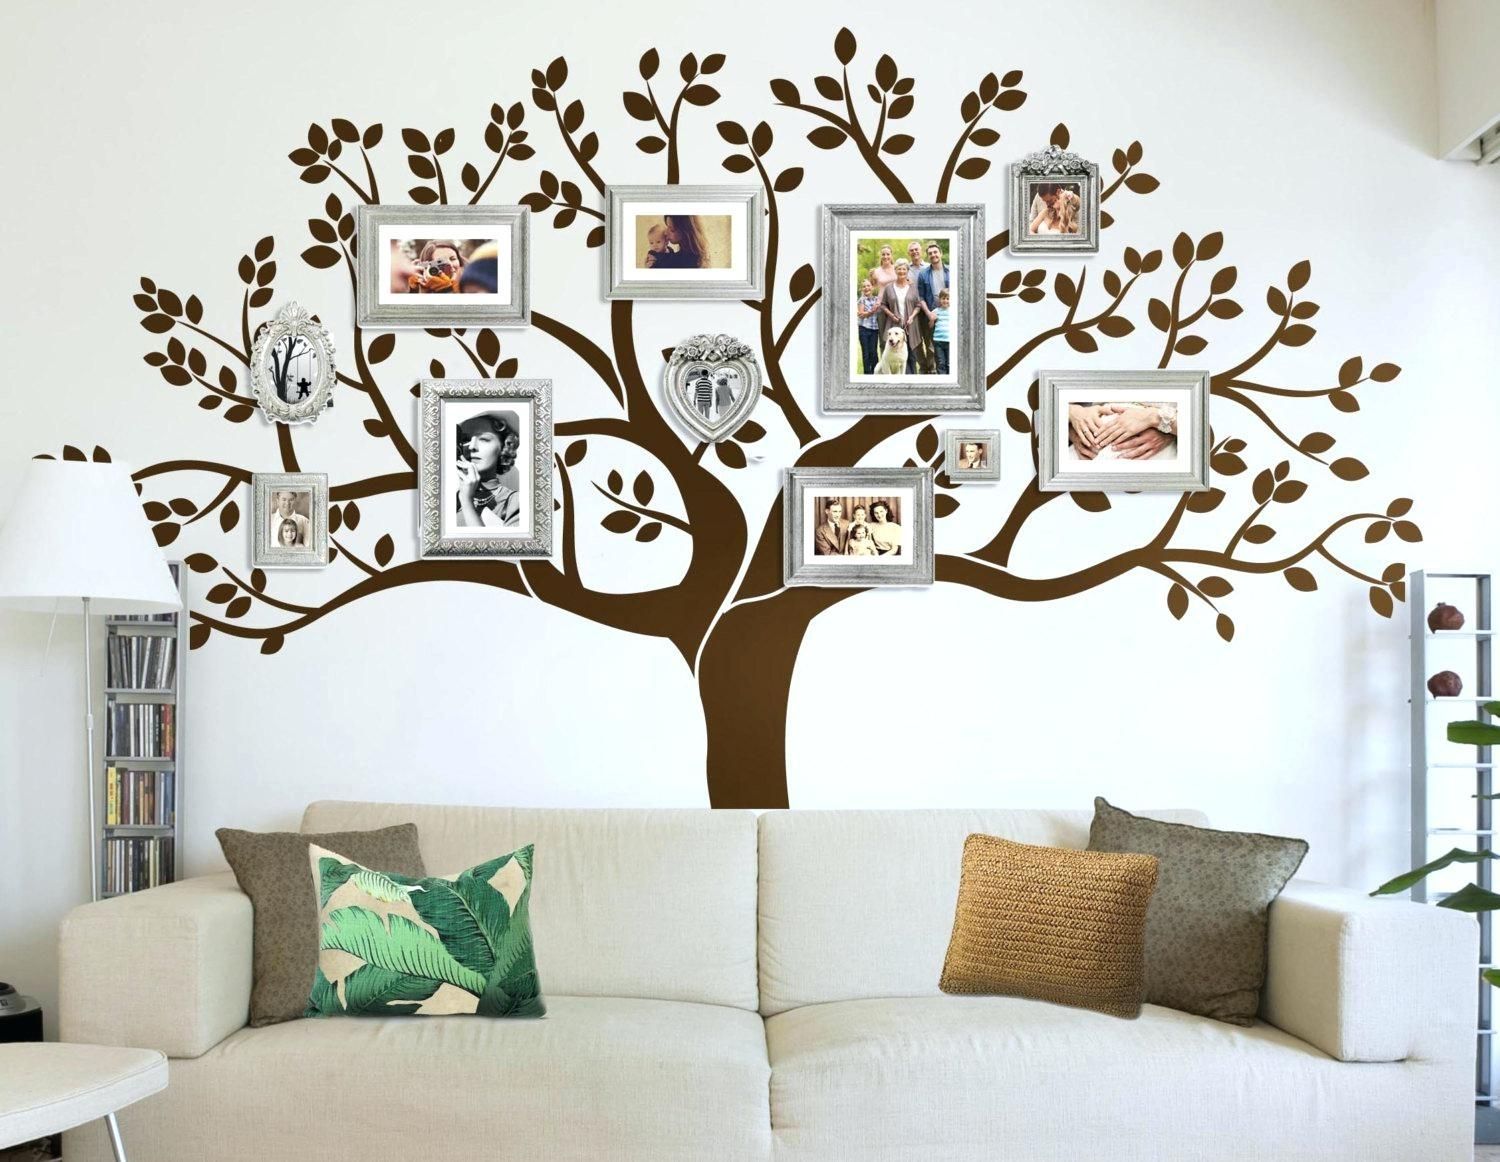 Stunning Large Wood Tree Wall Decor Art On Designs Decoration Diy With Regard To Wall Art (View 14 of 20)